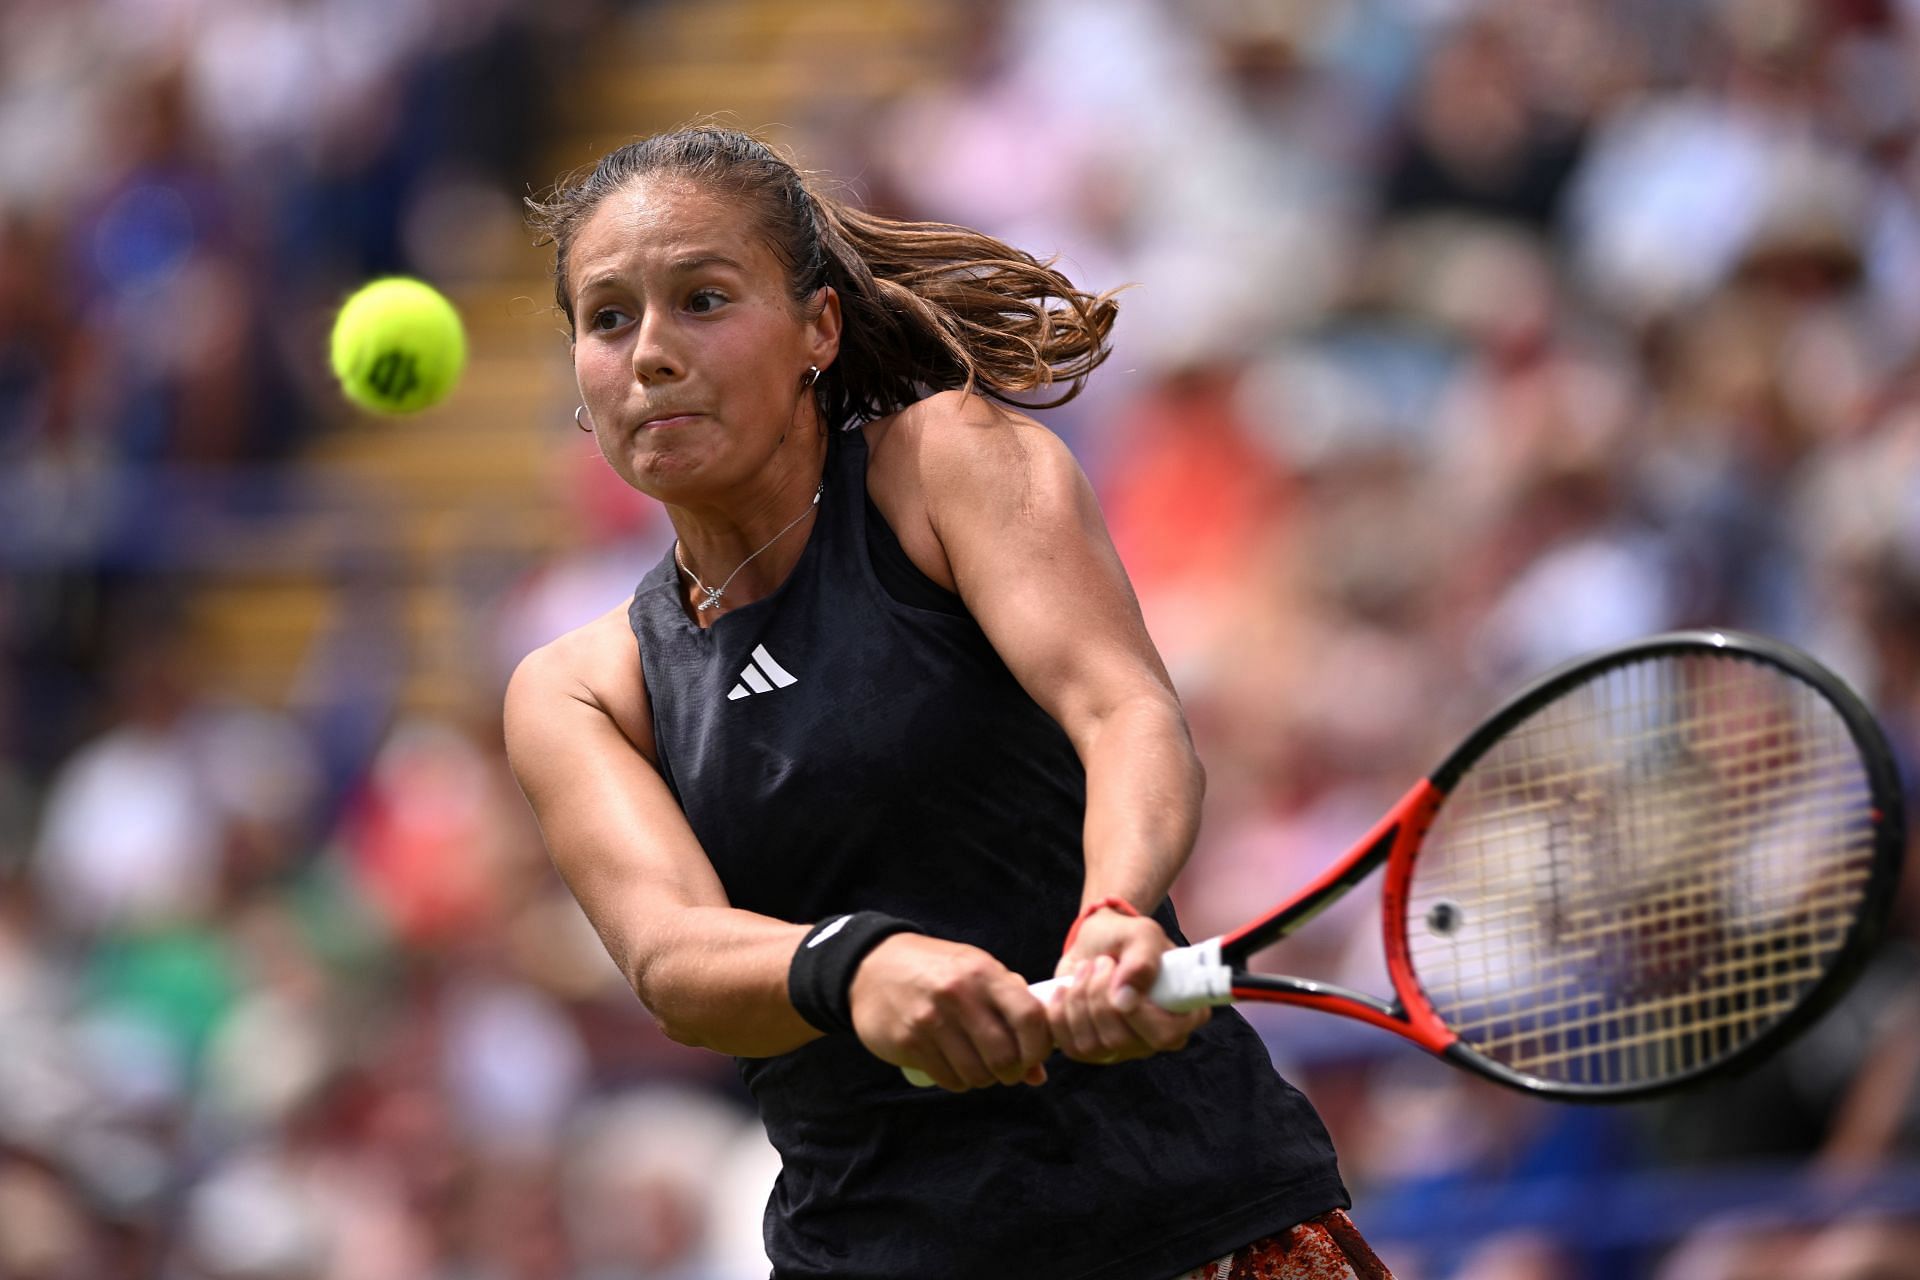 Kasatkina in action at the Rothesay International in Eastbourne